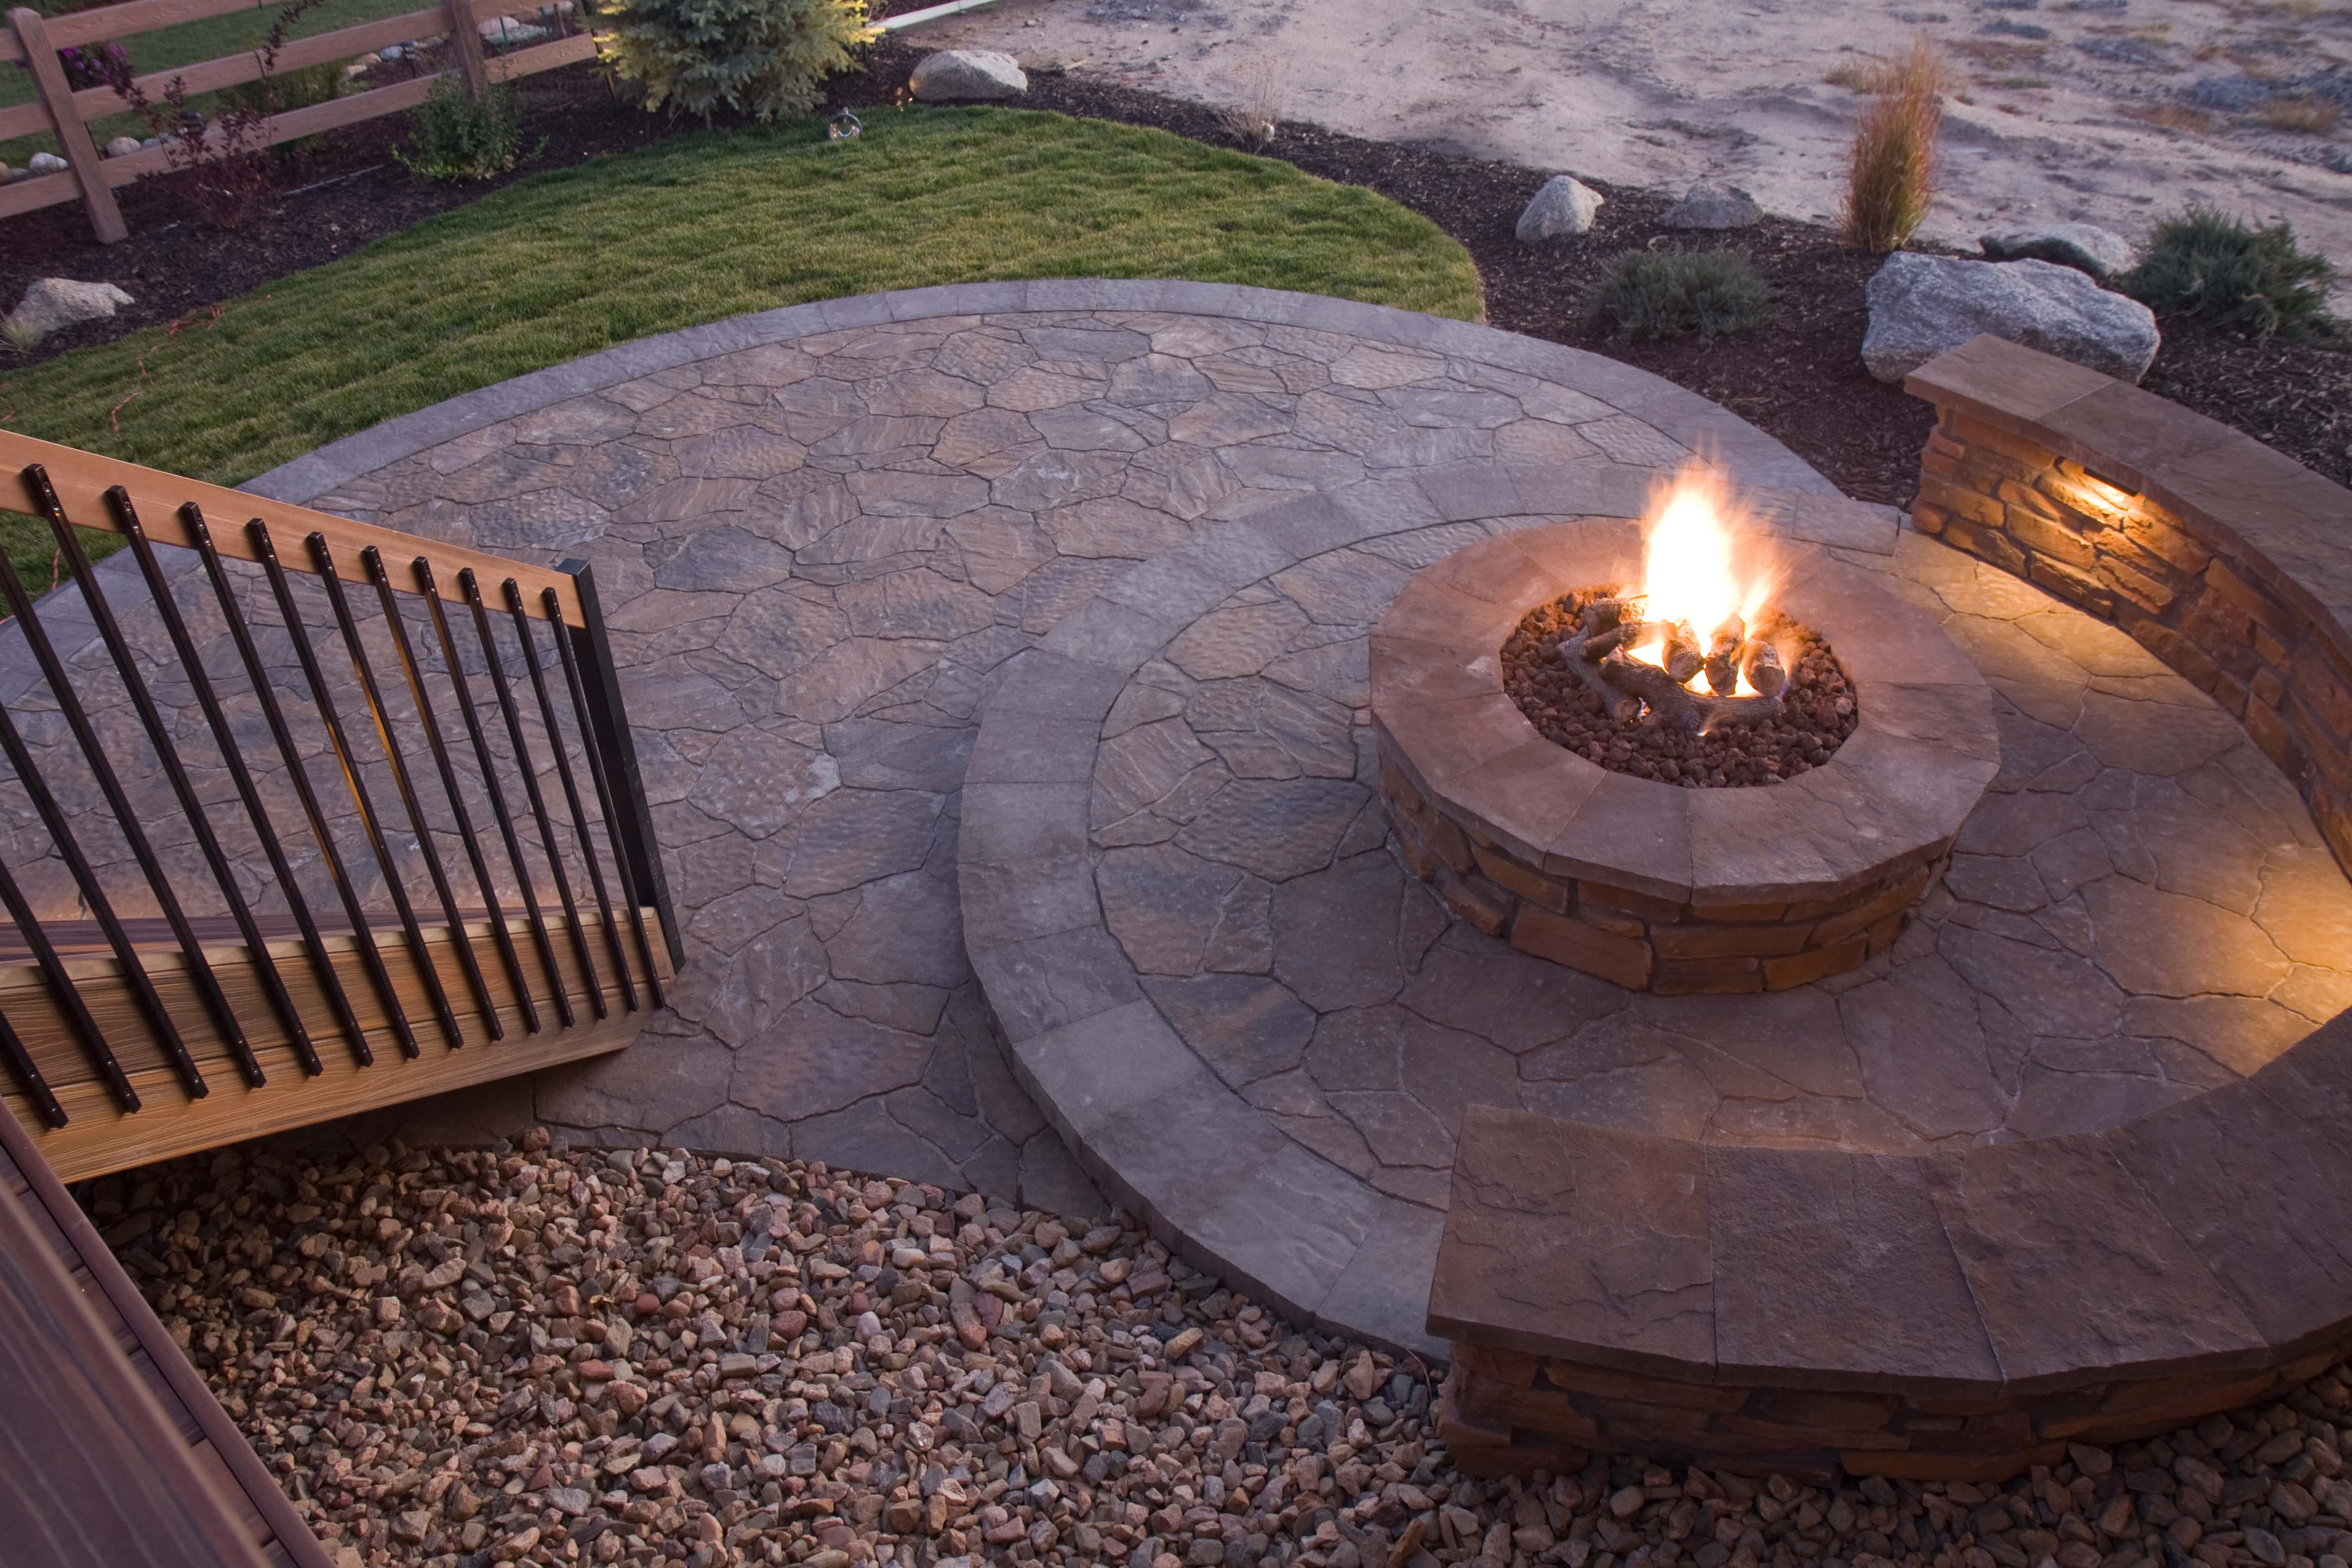 a lush mountain landscape with a rounded natural stone firepit in the center of a paver patio surrounded by landscaping